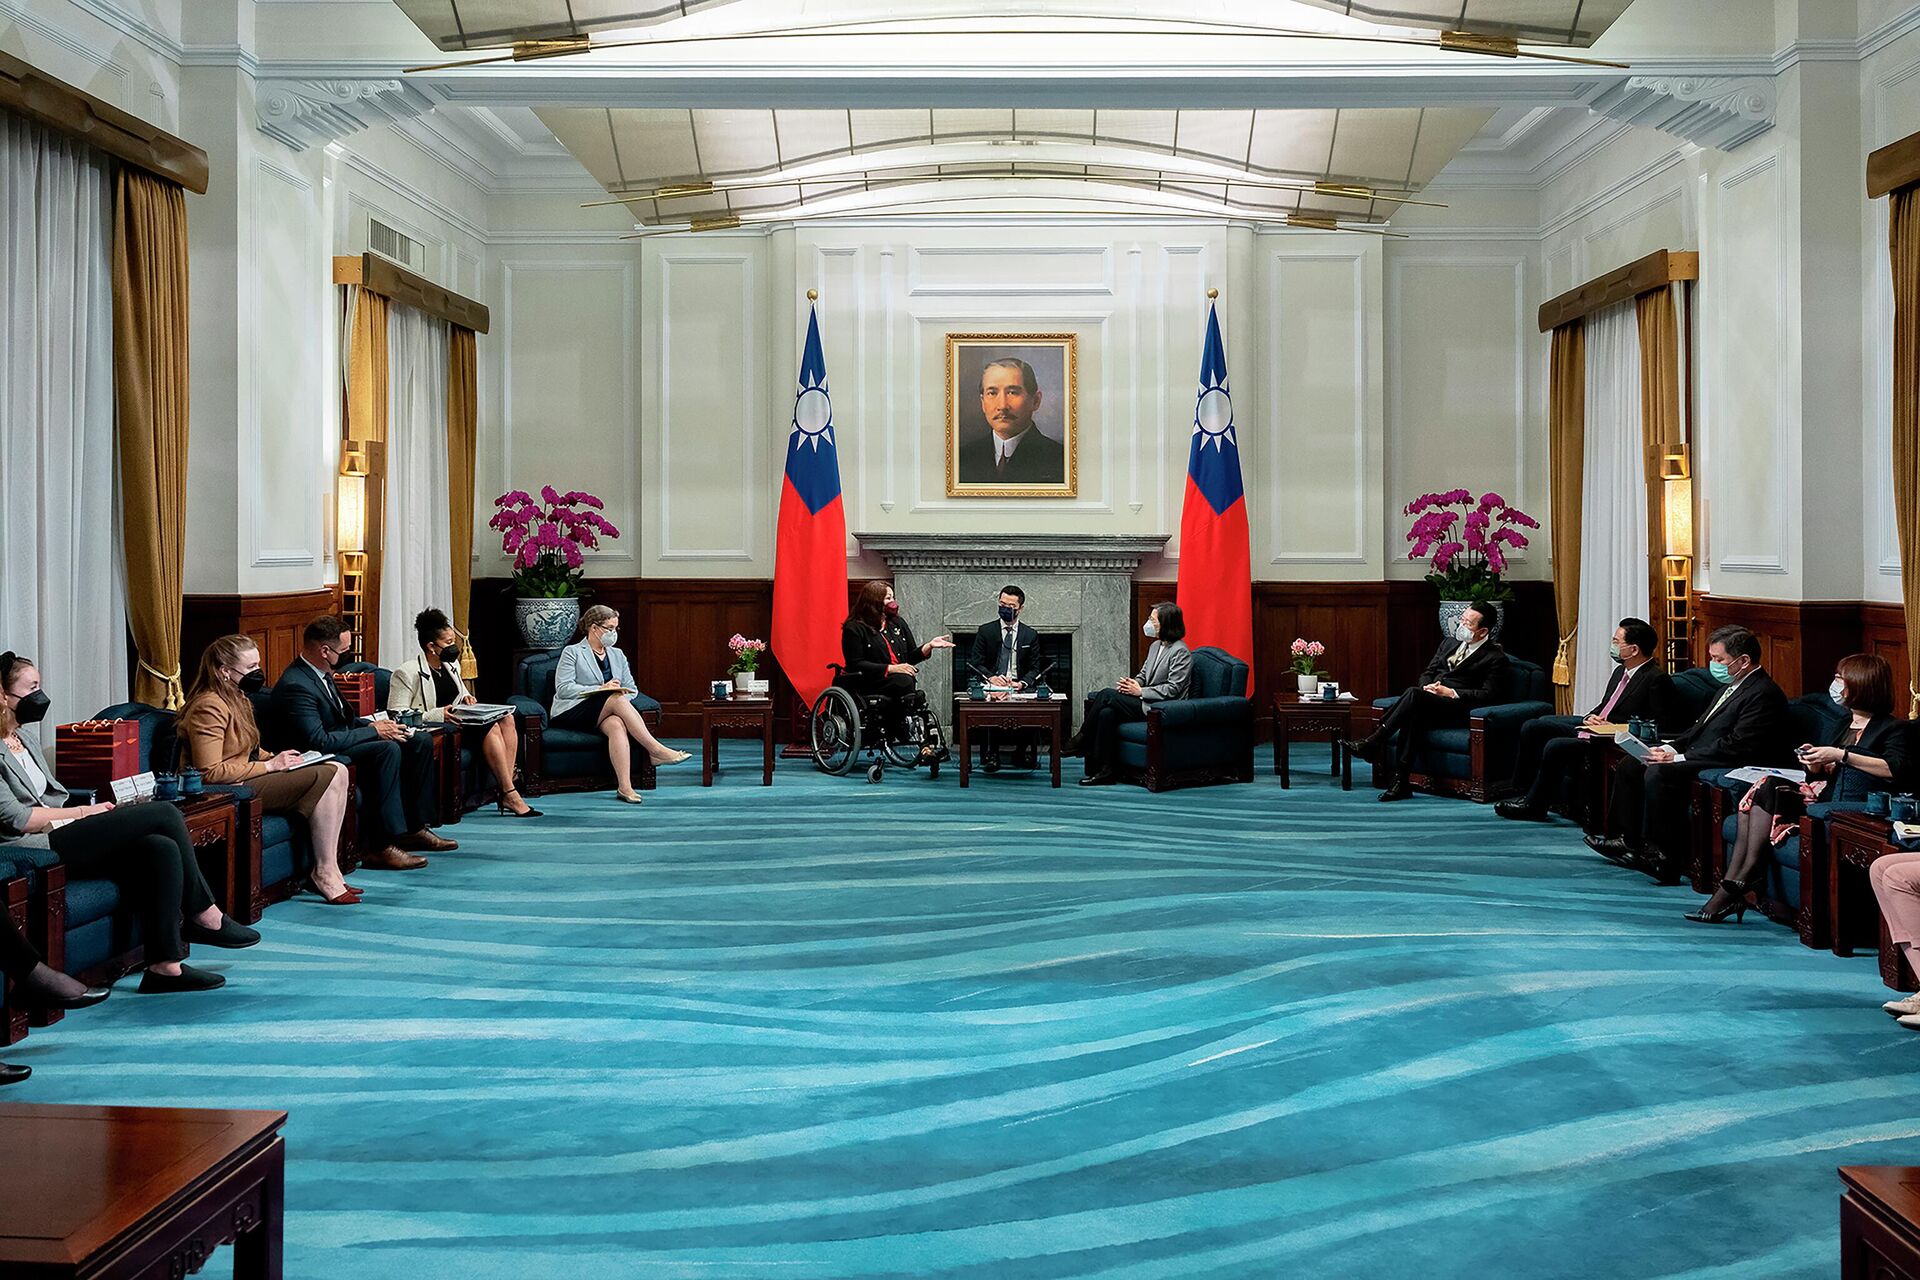 In this photo released by the Taiwan Presidential Office, U.S. Sen. Tammy Duckworth, D-Ill., center left, meets with Taiwan's President Tsai Ing-wen, center right, at the Presidential Office in Taipei, Taiwan, Tuesday, May 31, 2022 - Sputnik International, 1920, 01.06.2022